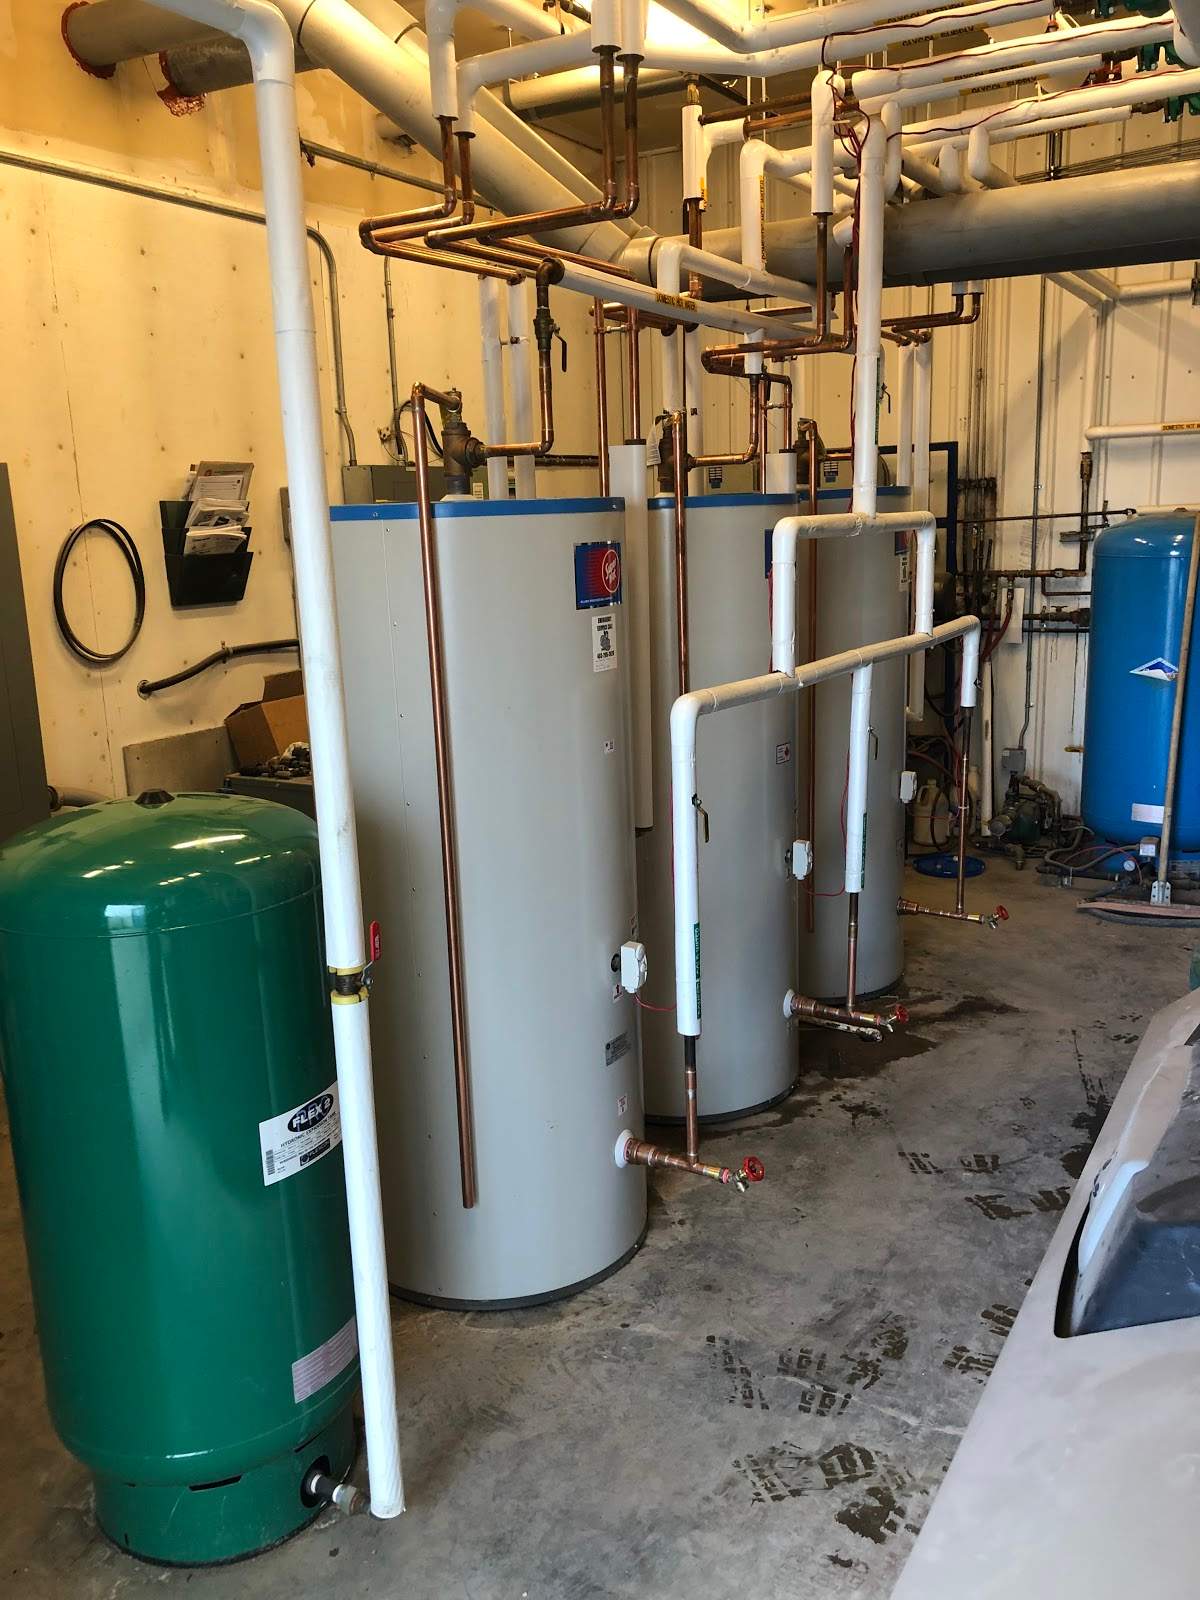 three hot water tanks installed in an interior space.